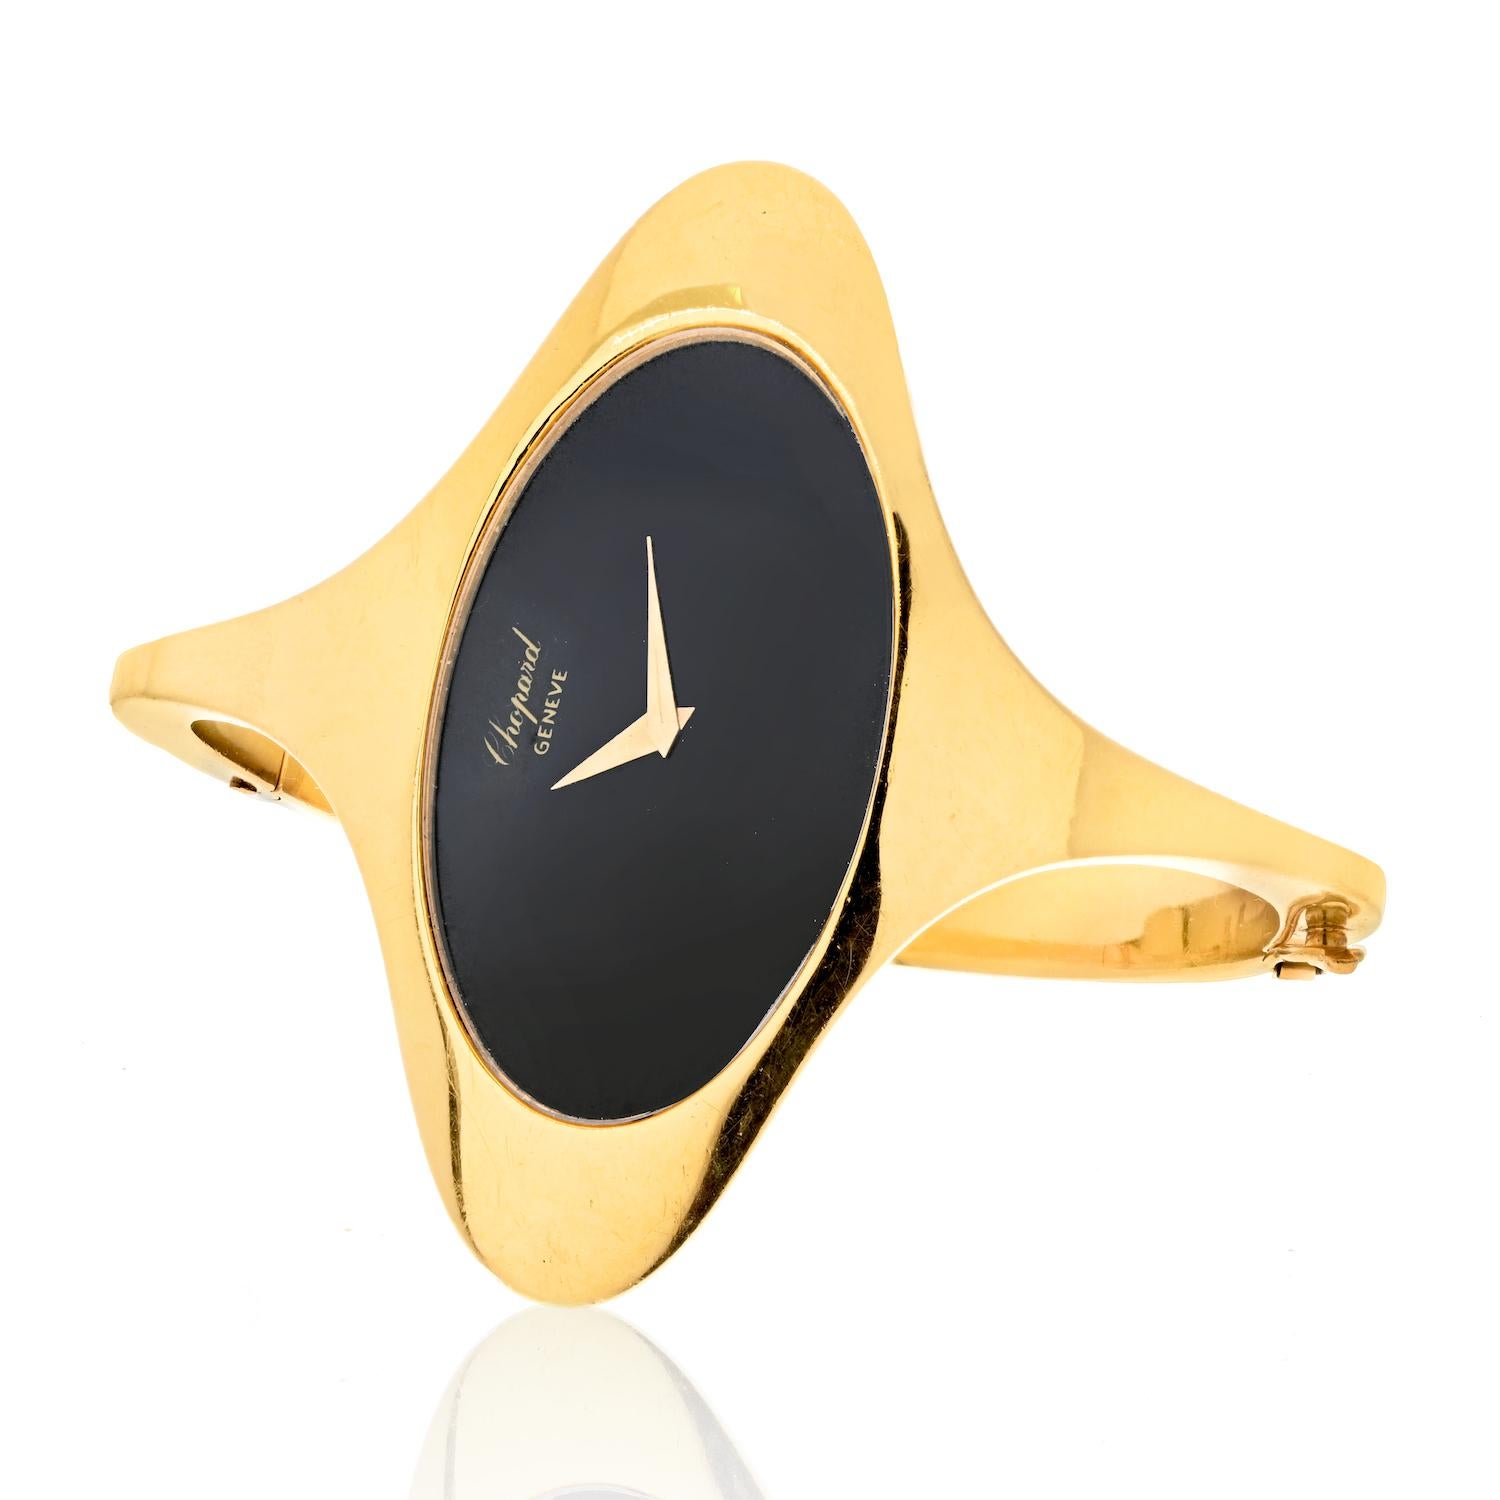 Presenting a stunning piece of horological history: a vintage 18K gold bangle bracelet watch from Chopard, crafted in the glamorous 1970s. This timepiece bears the reference number 5038, and it houses a precise mechanical movement powered by manual